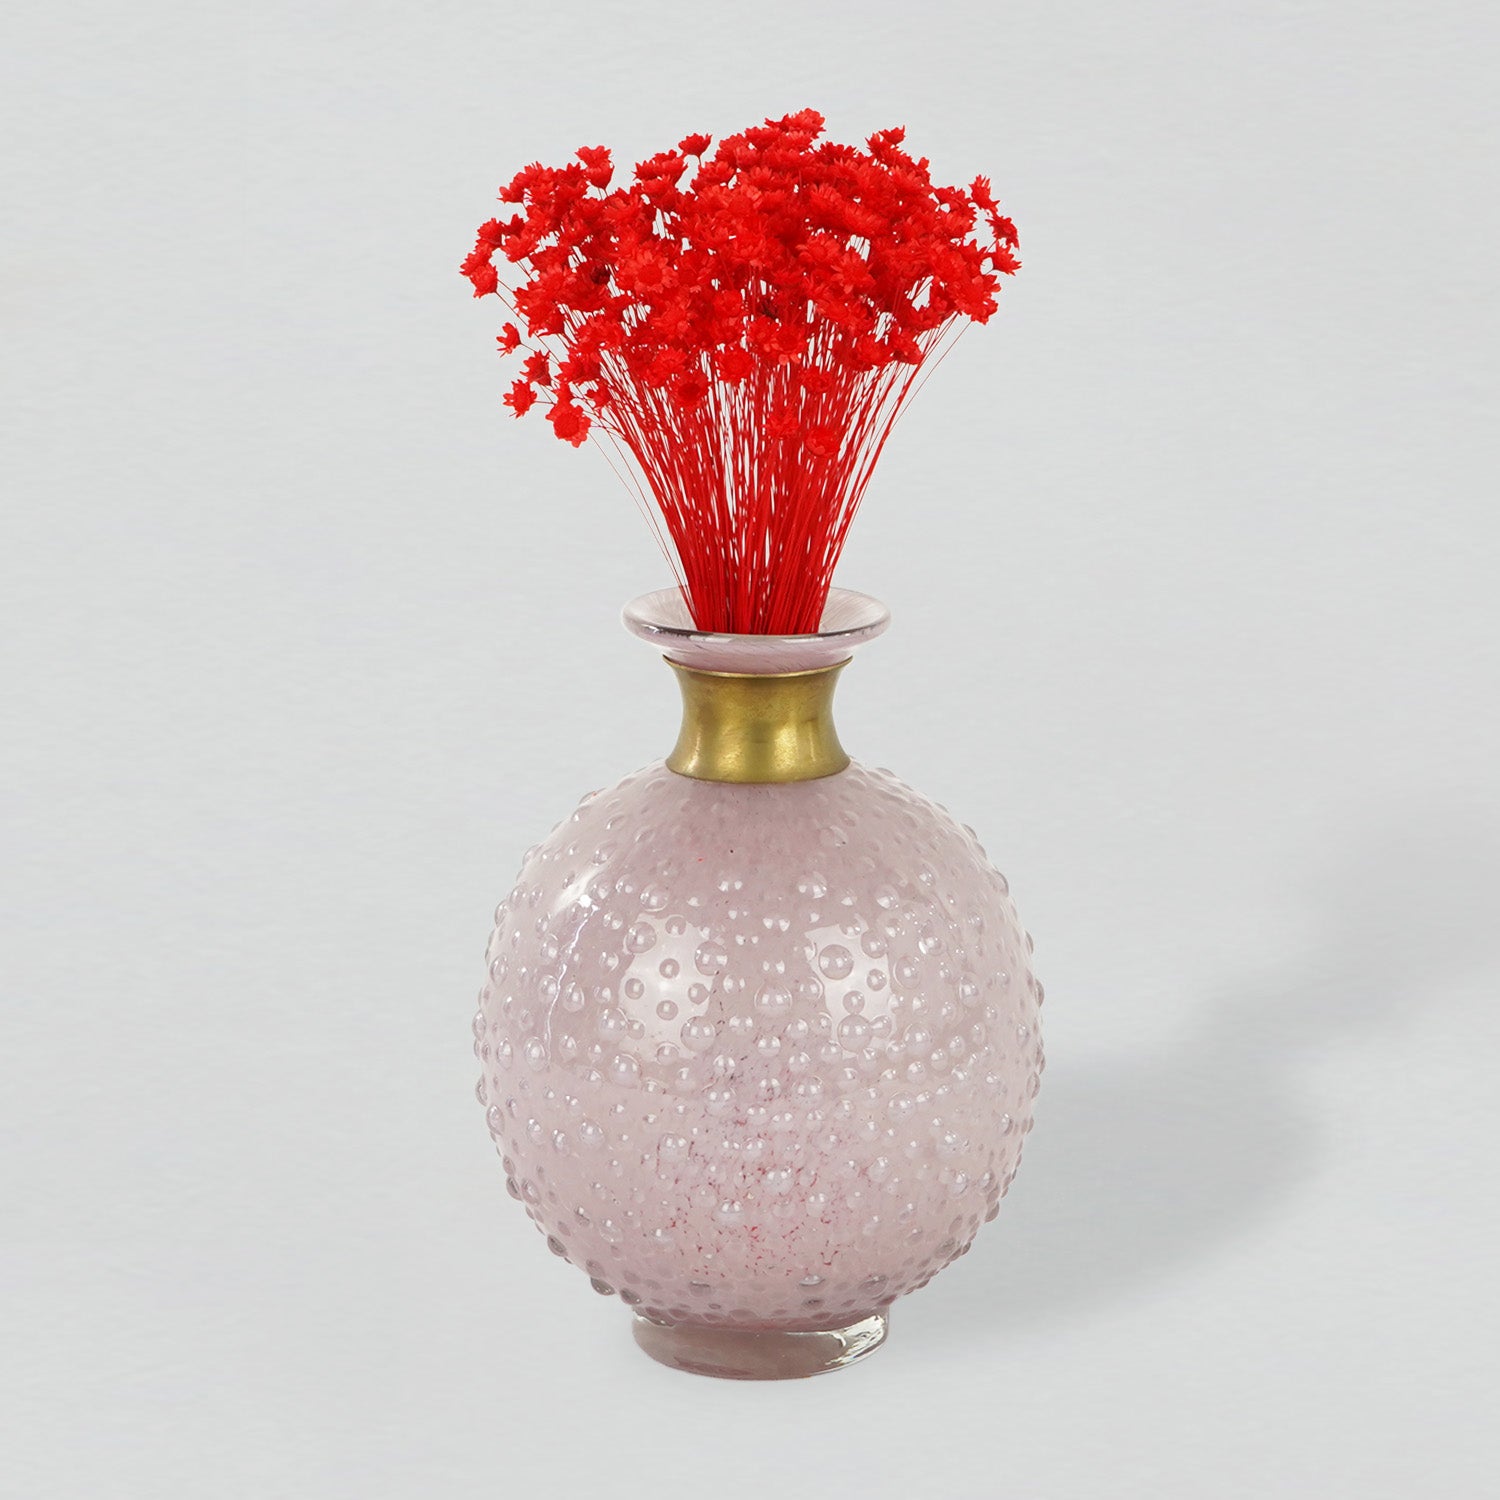 Red star flower blossom in a pink vase with gold detail